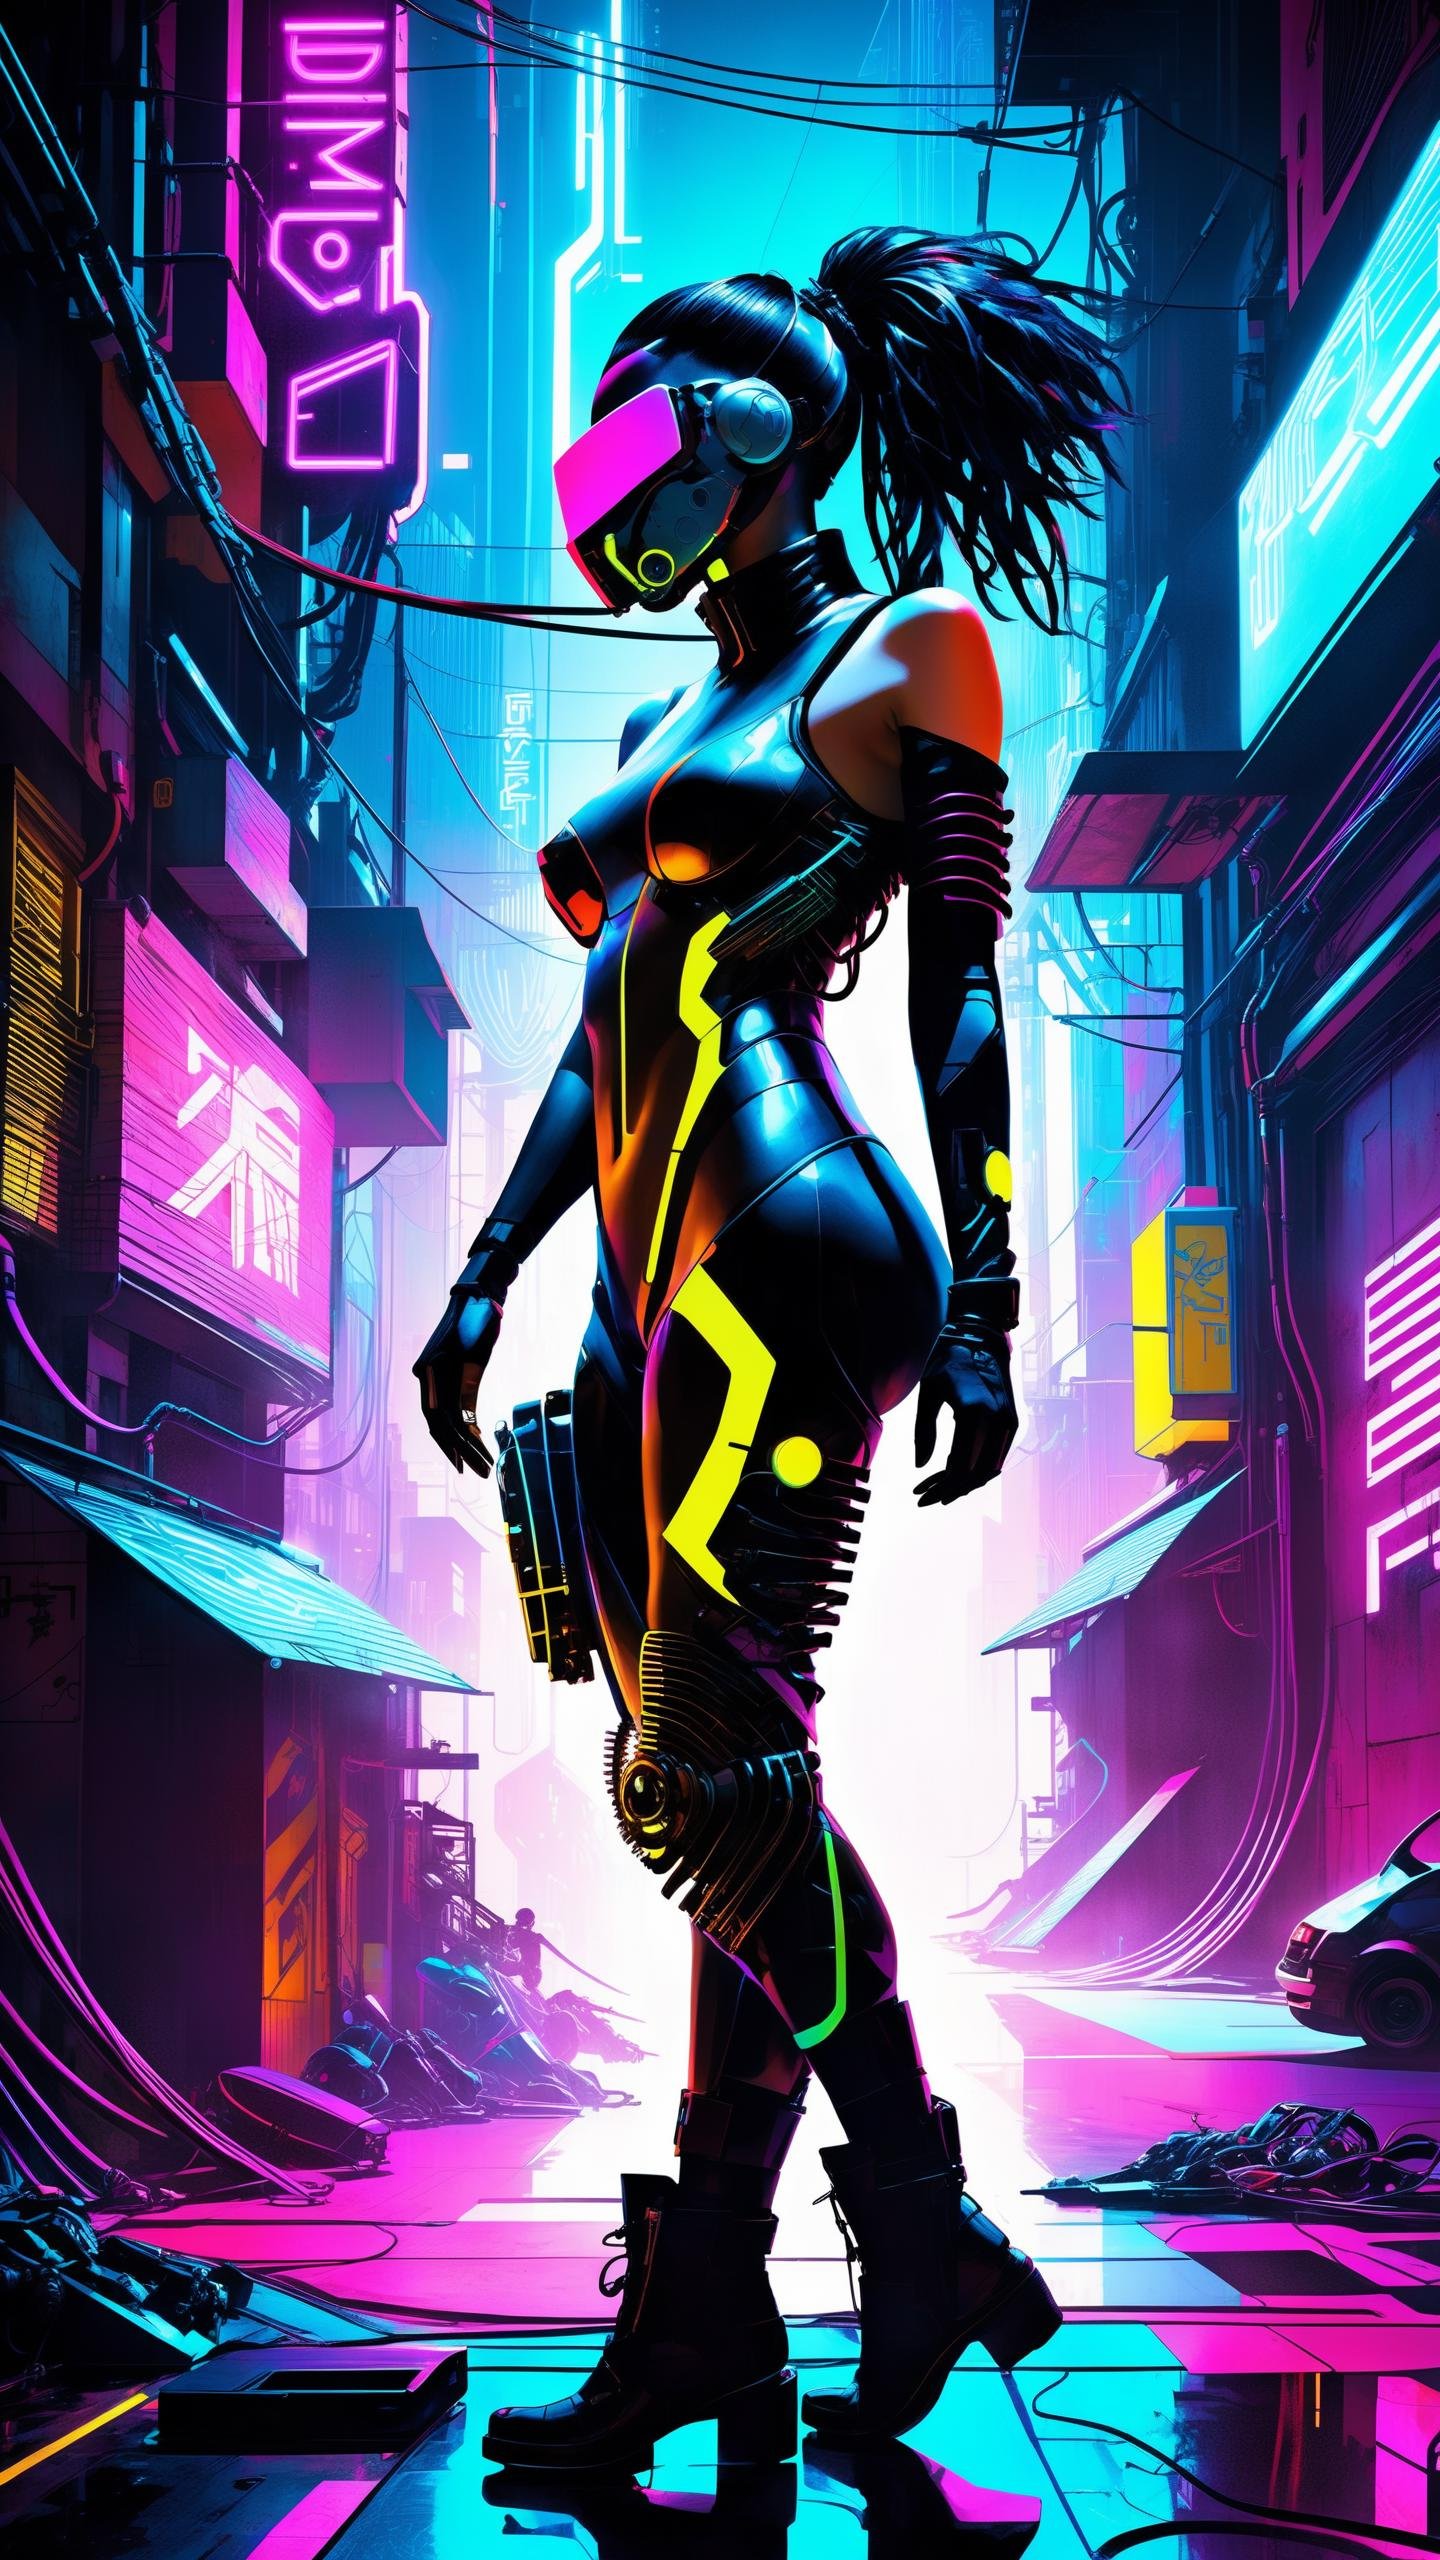 dark silhouette of a neonpunk biomechanical cyberpunk woman night, cyberpunk, wearing a stillsuit mask up, quarter turned, multicolor, bright colors, against the abstract dystopian background of dark neon light, revealing part of her face, Her body is fused with various types of cybernetics, making it seem both organic and artificial at the same time. style of Guweiz and David Mattingly, strict rule of thirds, stunning image showcases hyper-detailed textures and elements to capture the essence of a neon punk biomechanical cyberpunk world with ultra-realistic visuals, sharply focused on her presence in this dark alley